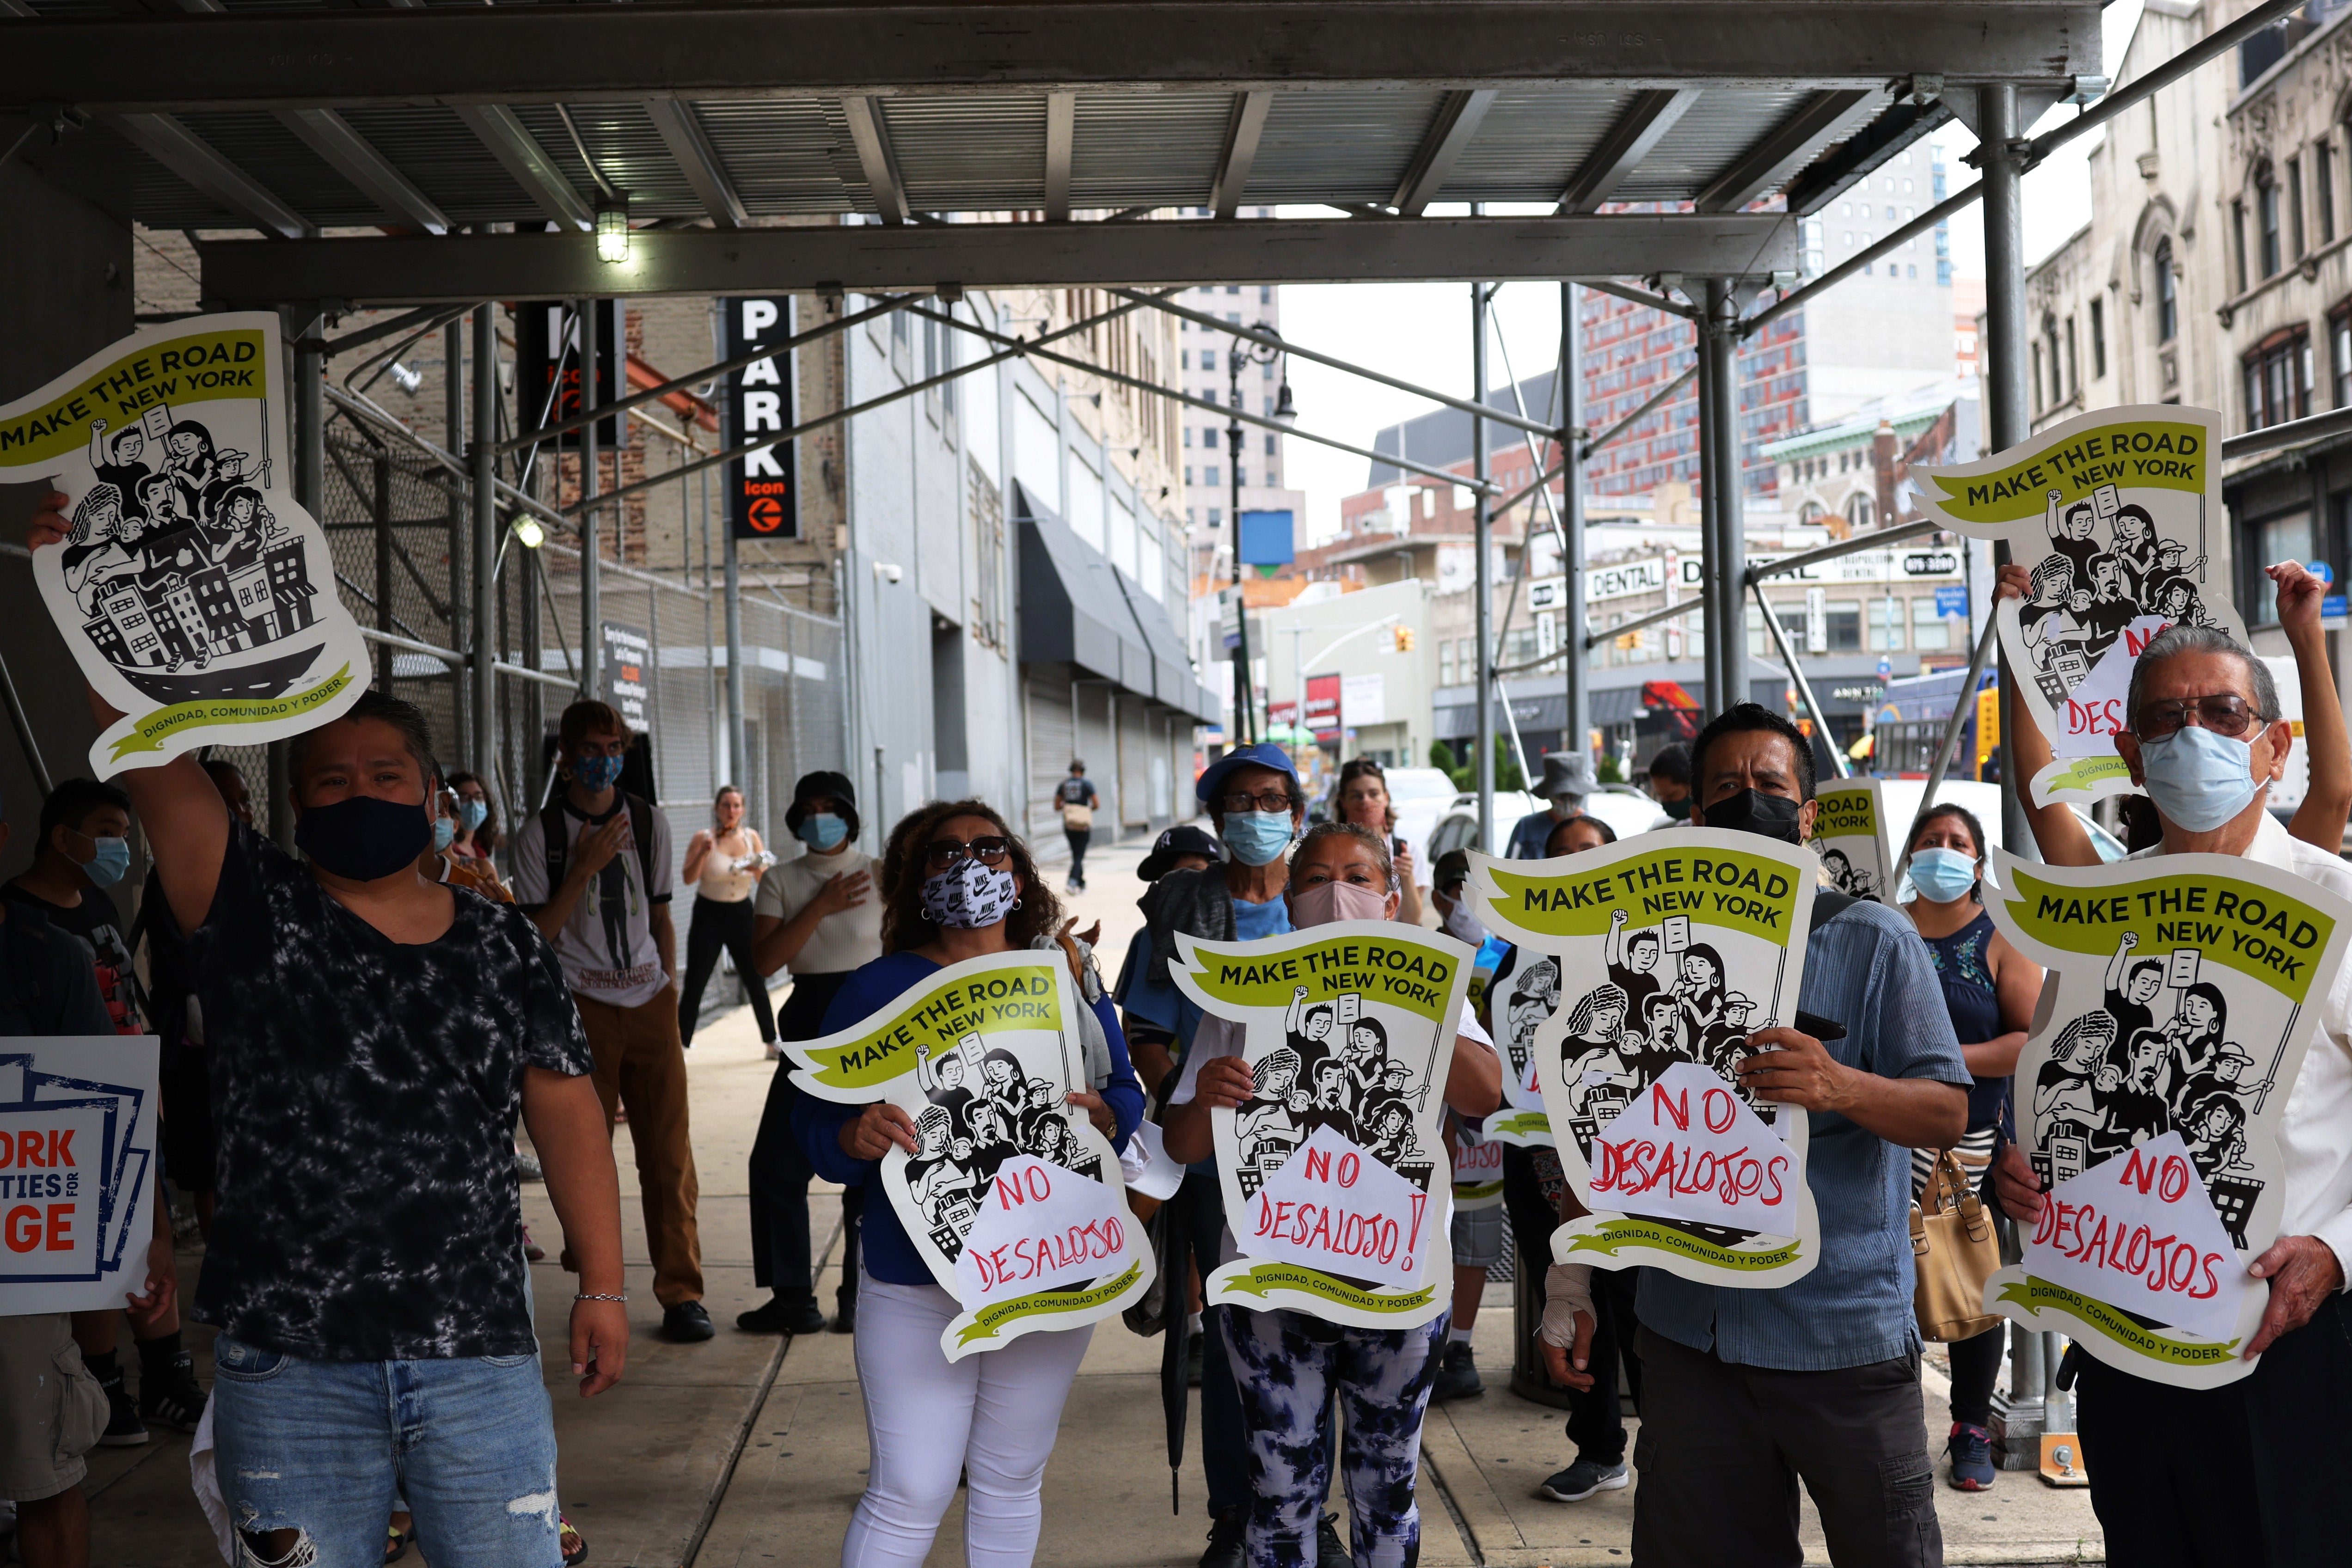 File image: Demonstrators gather at Brooklyn Housing court during a ‘No Evictions, No Police’ national day of action on 1 September, 2020 in New York City